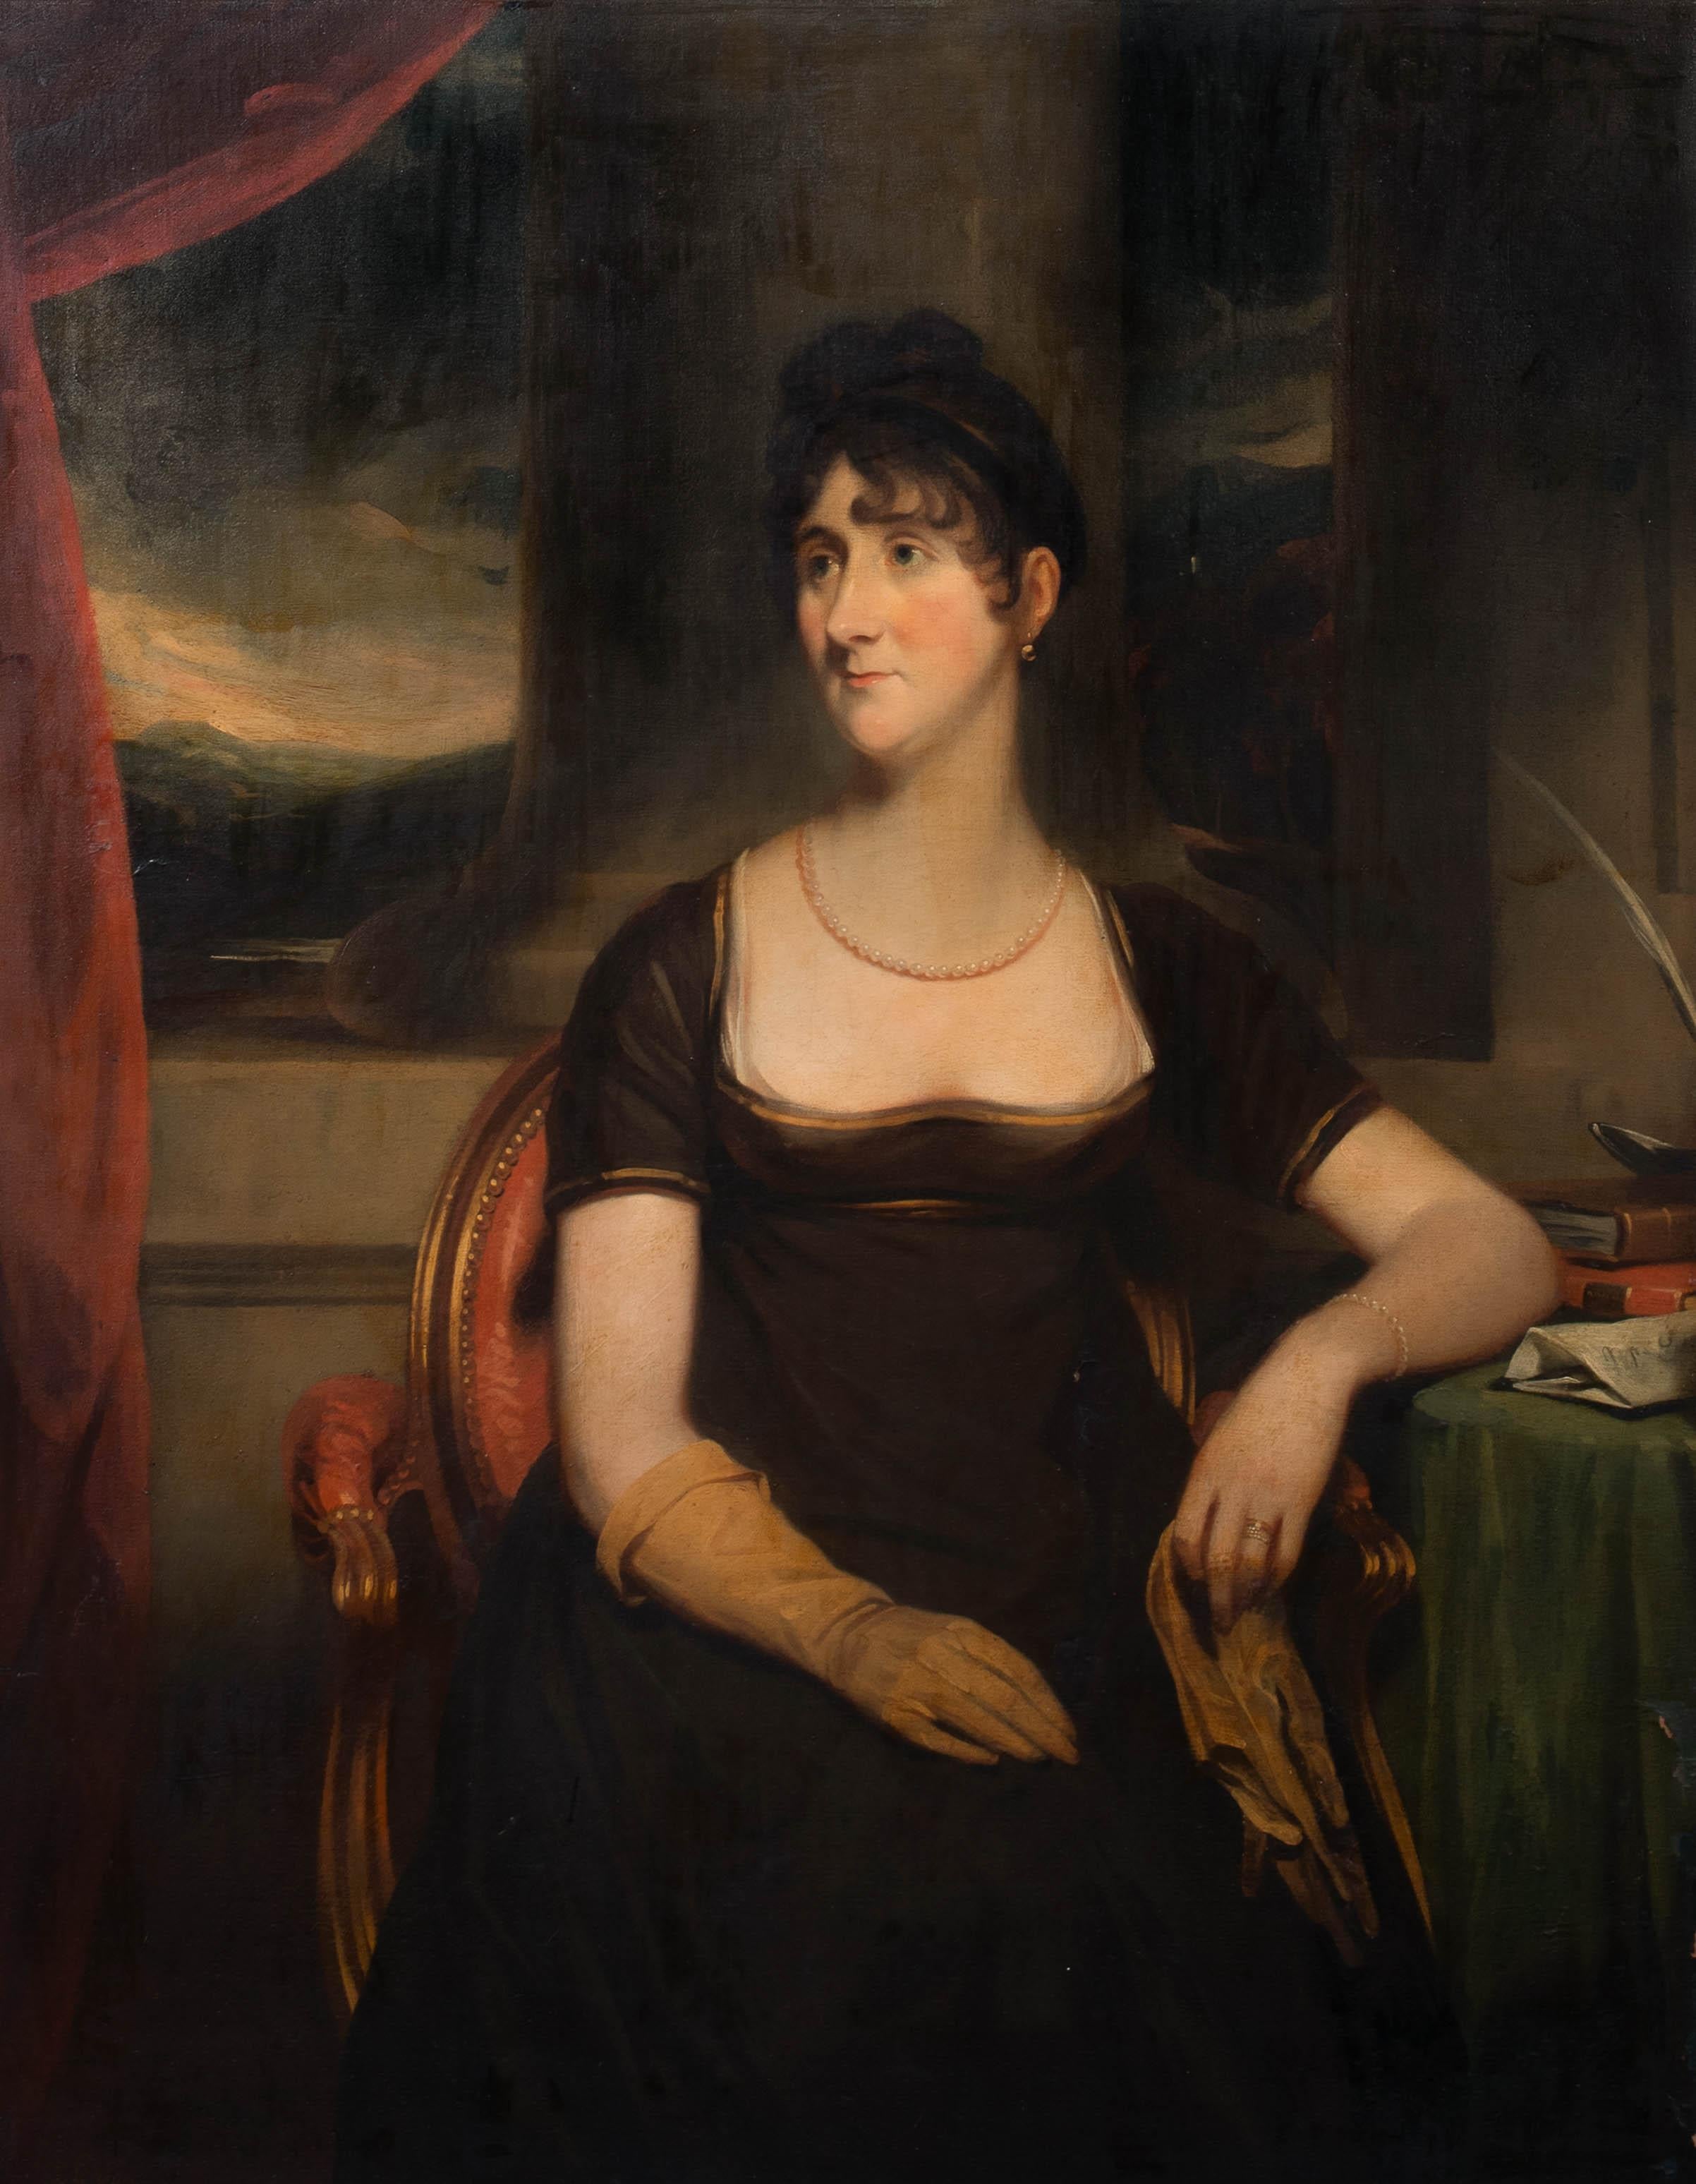 Portrait Of A lady Identified As Frances Thomasine, Countess Talbot, Wife of the 2nd Earl Talbot (1778–1819)

attributed to SIR WILLIAM BEECHEY (BRITISH 1753-1839)

Large early 19th Century Portrait of a lady identified as Frances Thomasine,